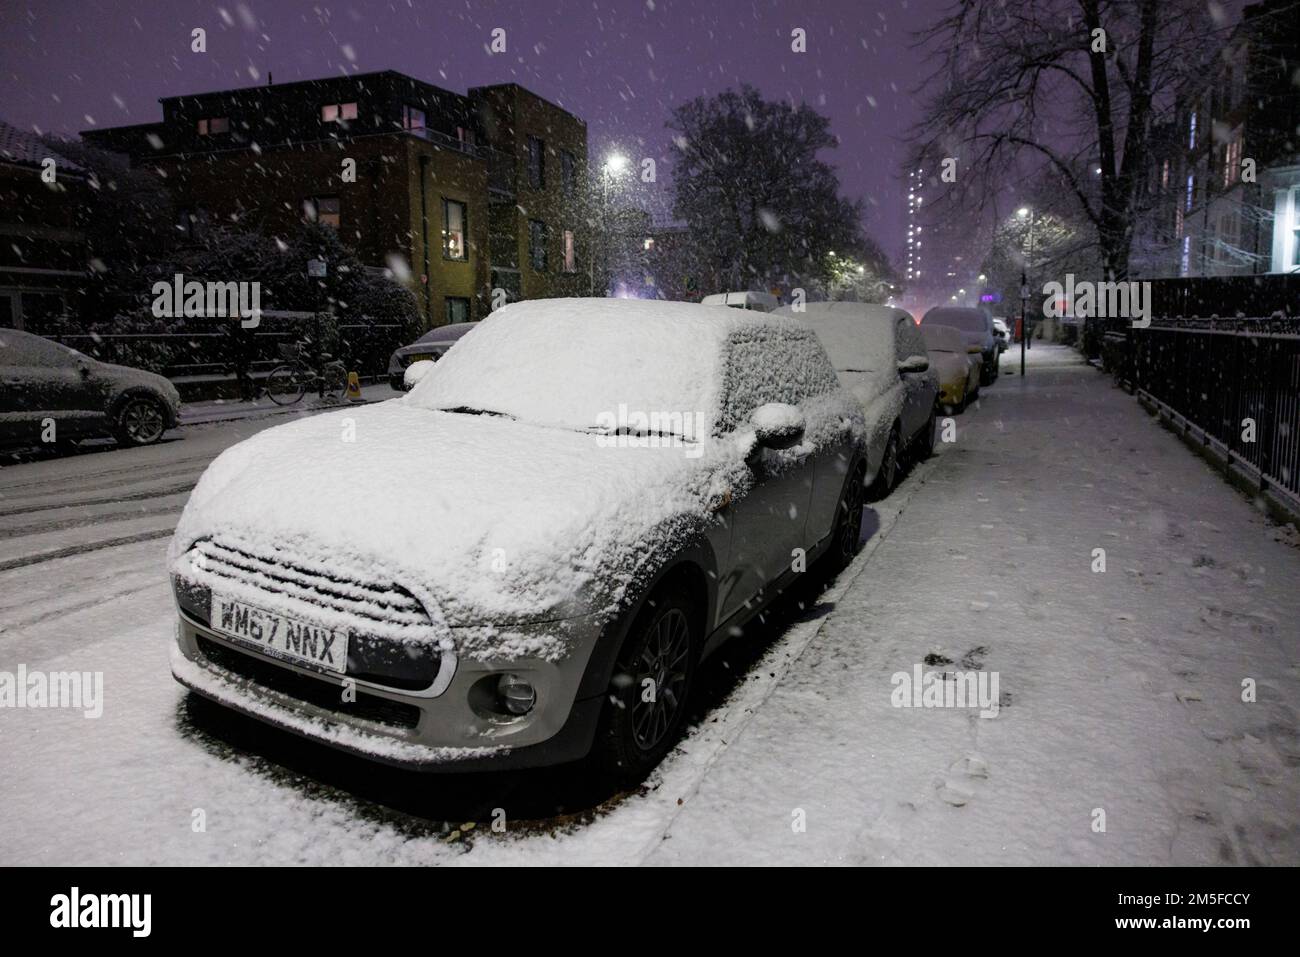 Snow falls on cars parked in Stockwell, South West London, as an un-forecast cold snap covers the capital and much of the south east of England with a Stock Photo